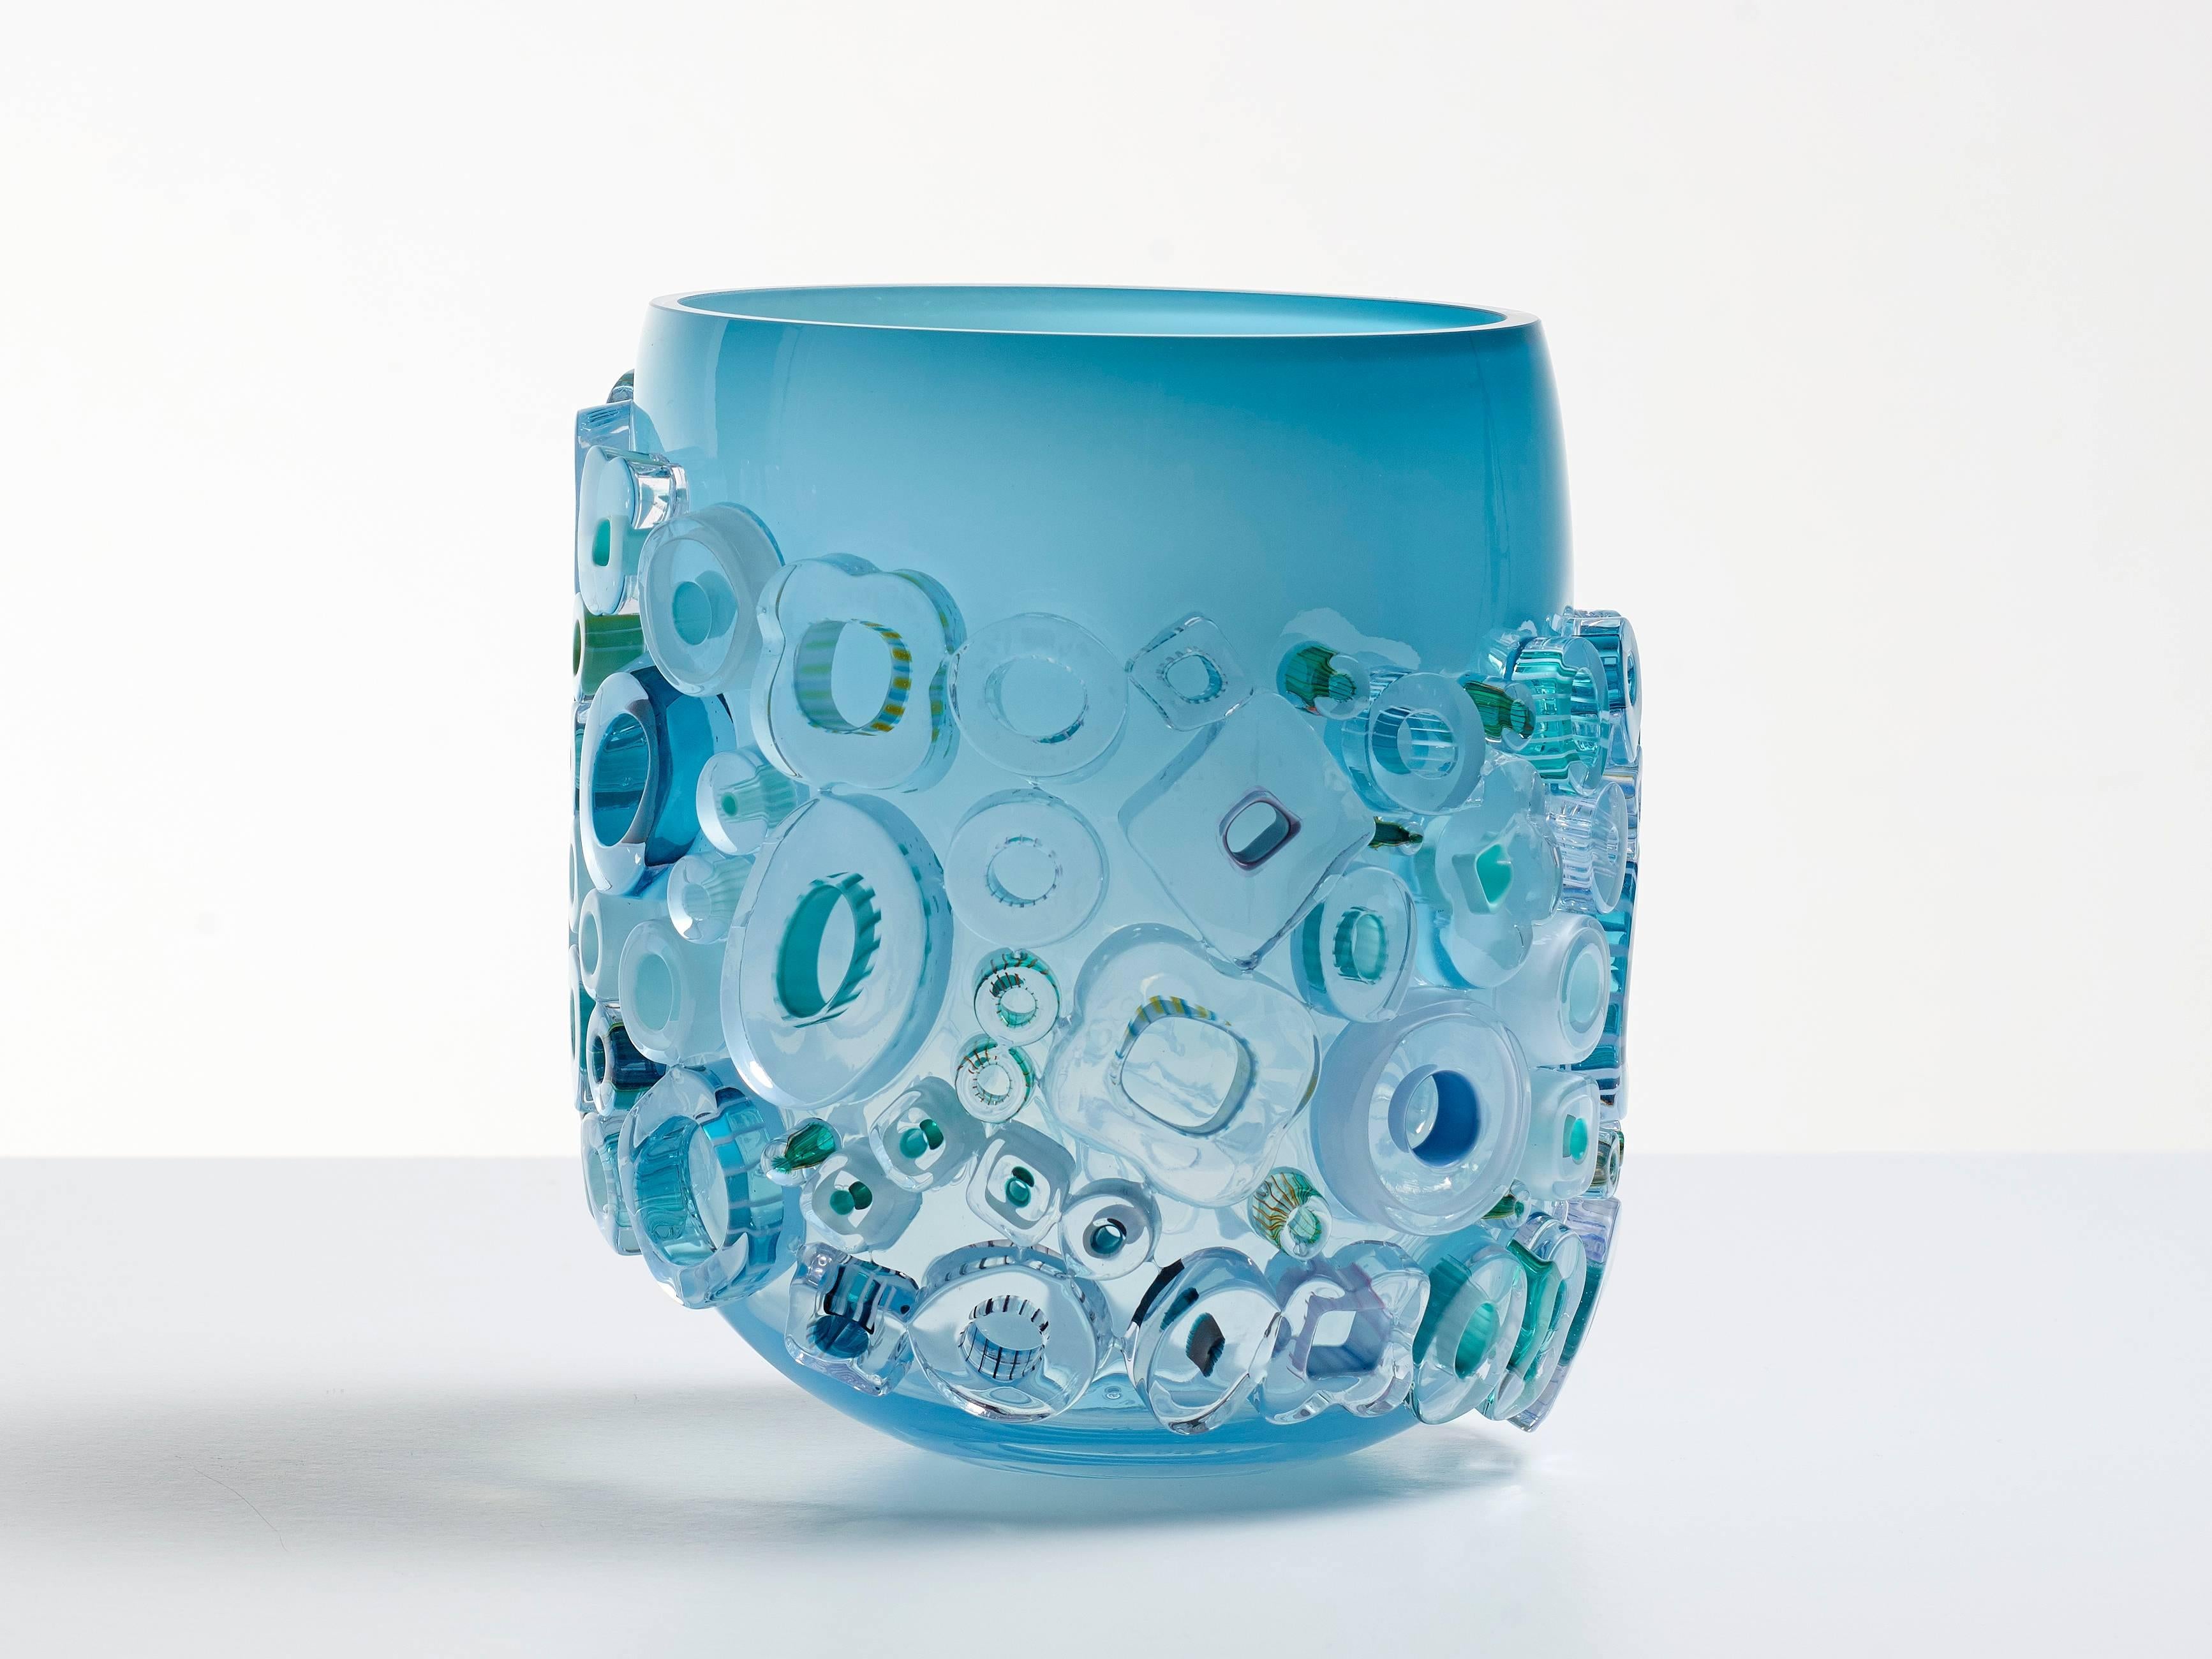 Sabine Lintzen Abstract Sculpture - Murano glass style blue vase. Blue blown glass vessel with glass ornaments